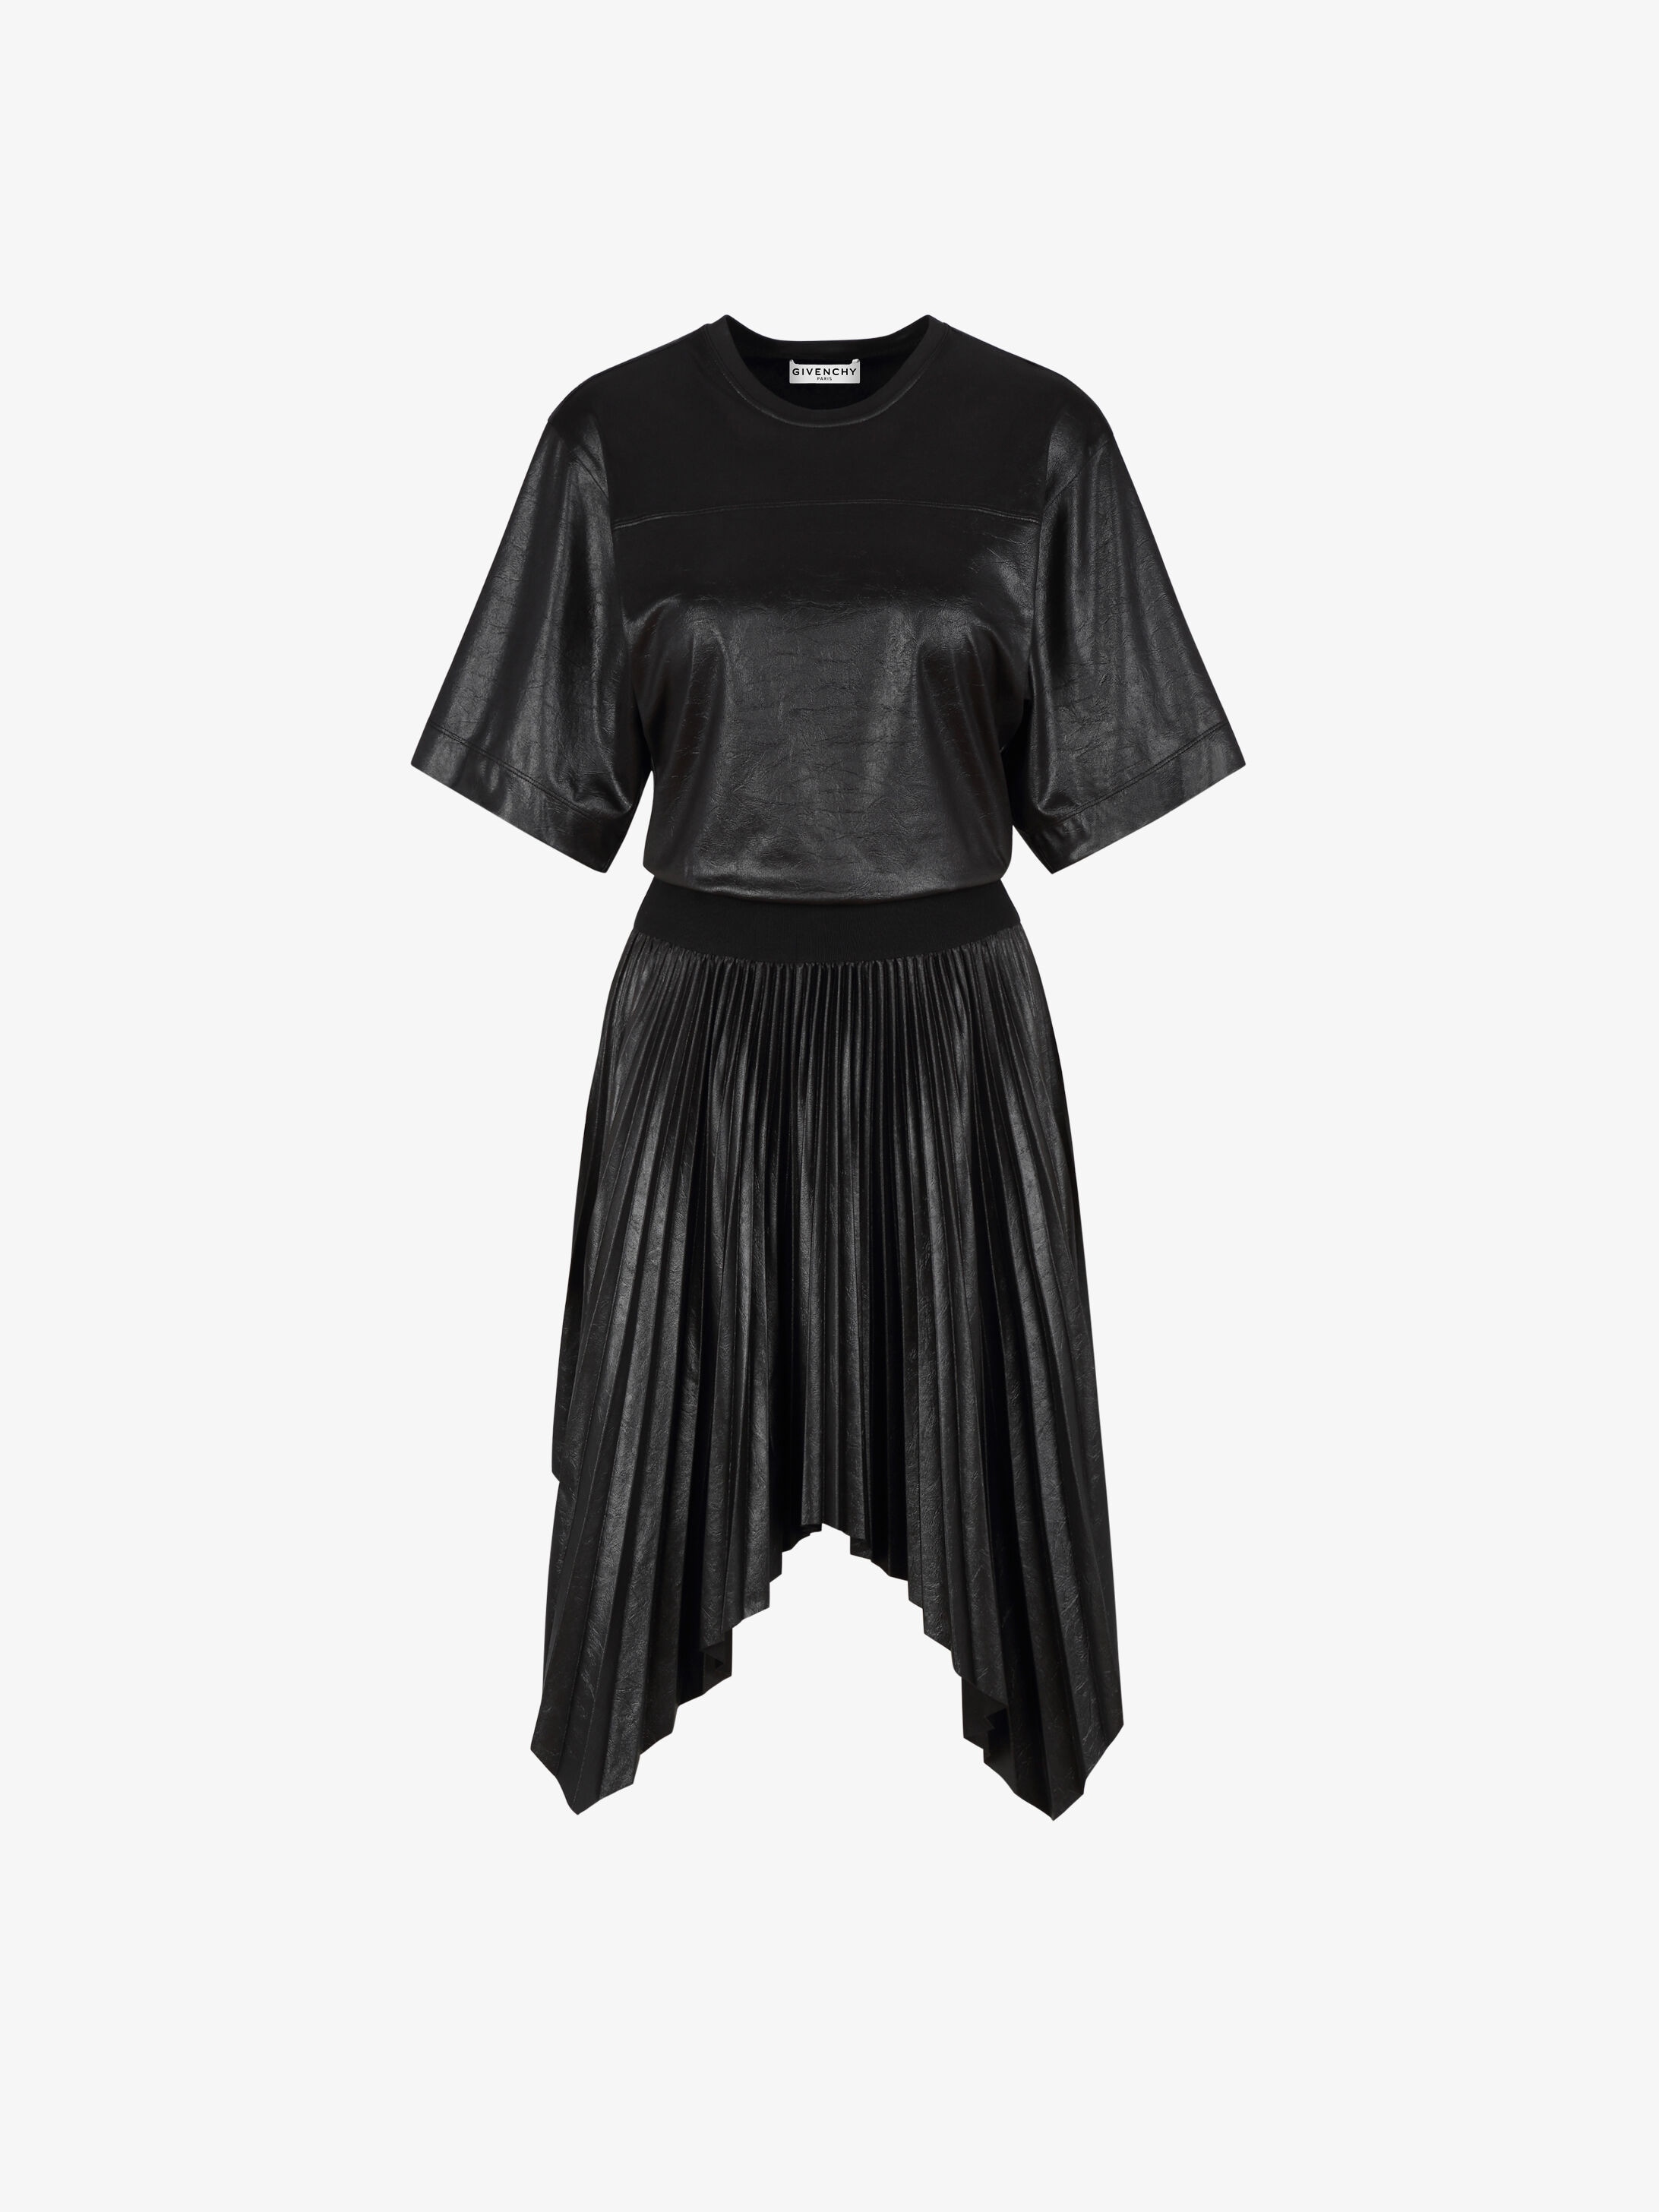 givenchy dress price